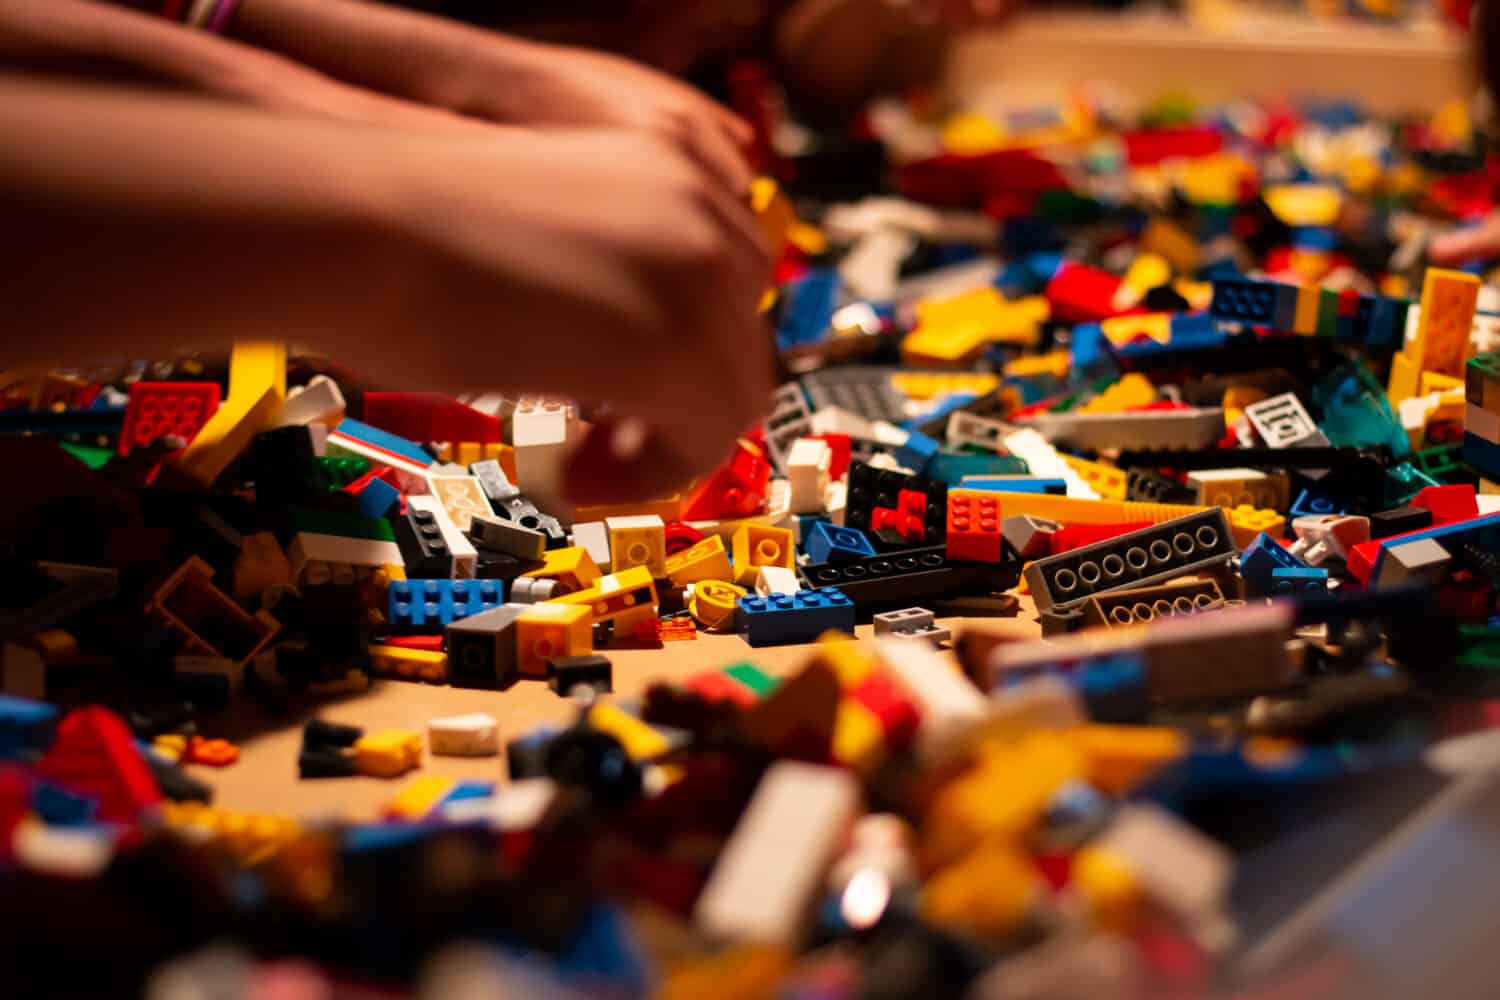 Huge pile of colorful lego bricks with childrens hands